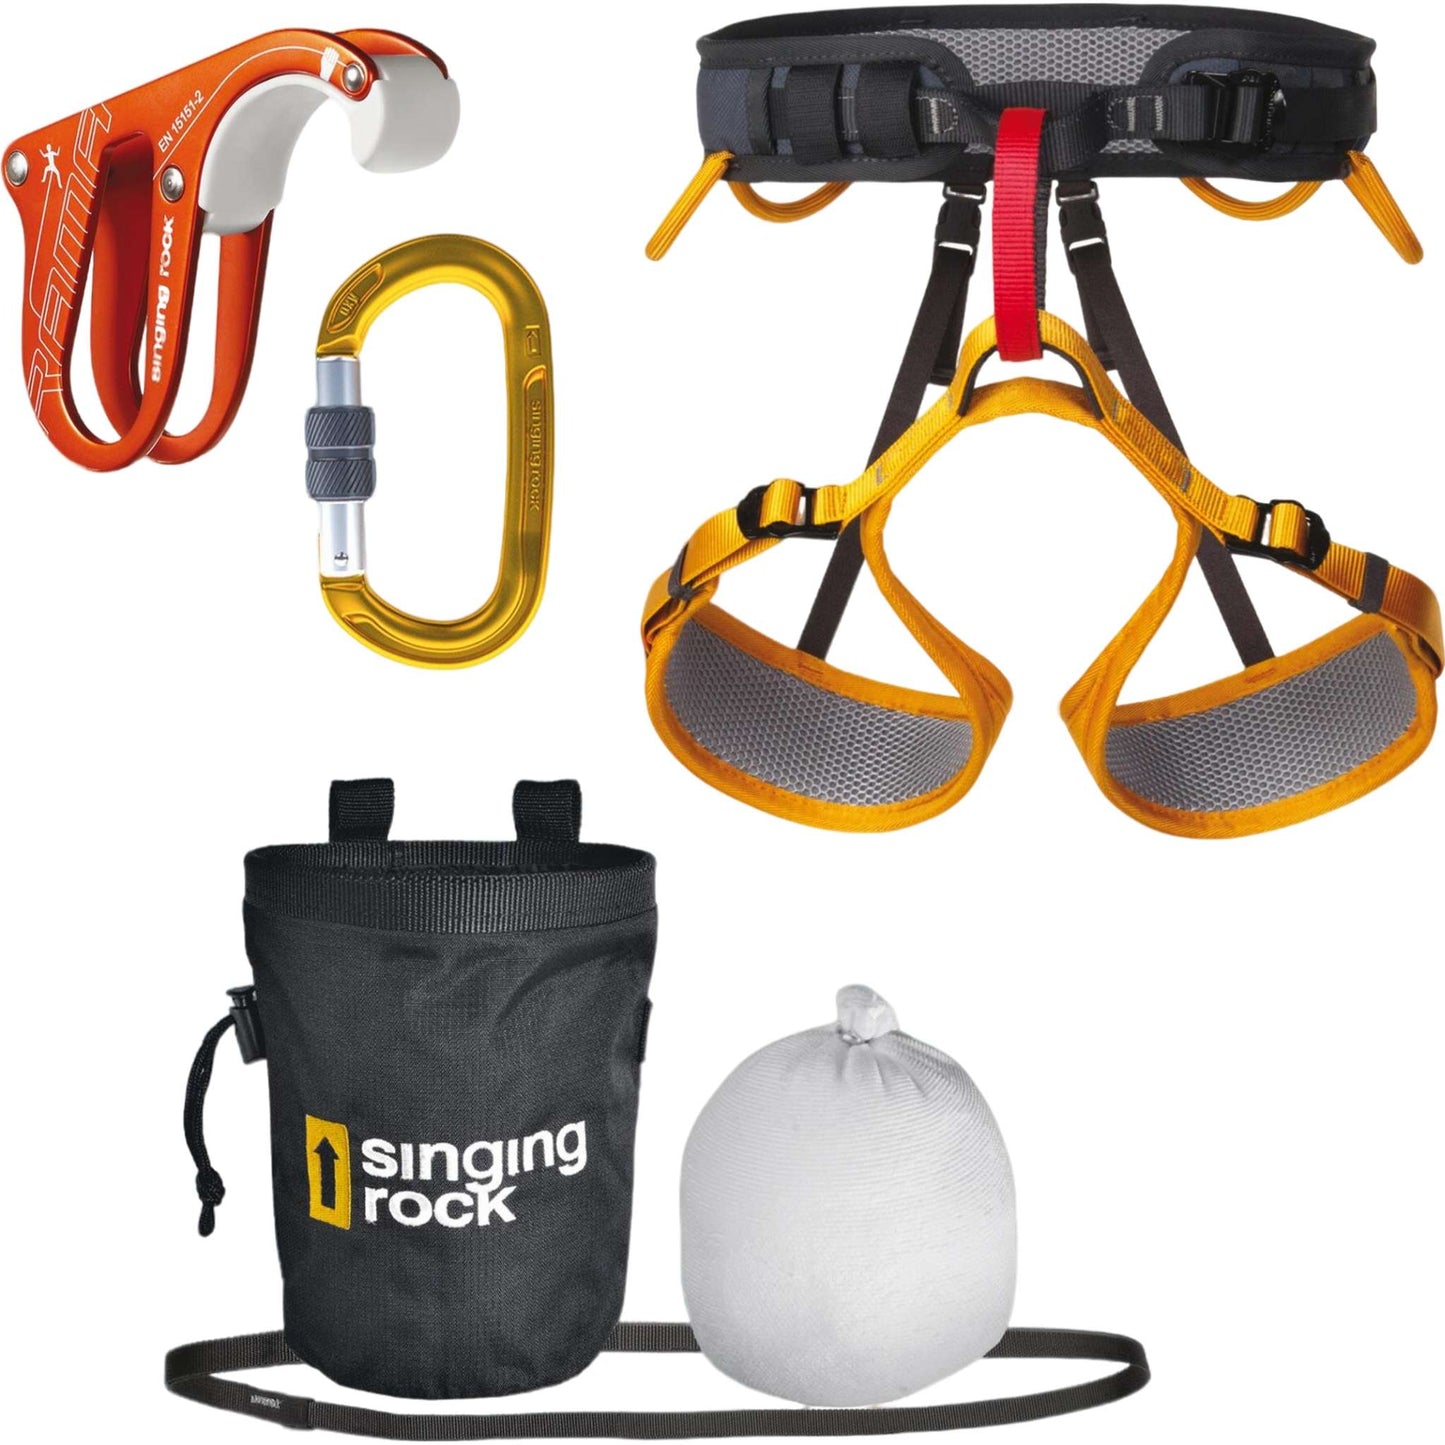 Gym Packet - Complete Climbing Gear Set for Indoor and Single Pitch Enthusiasts